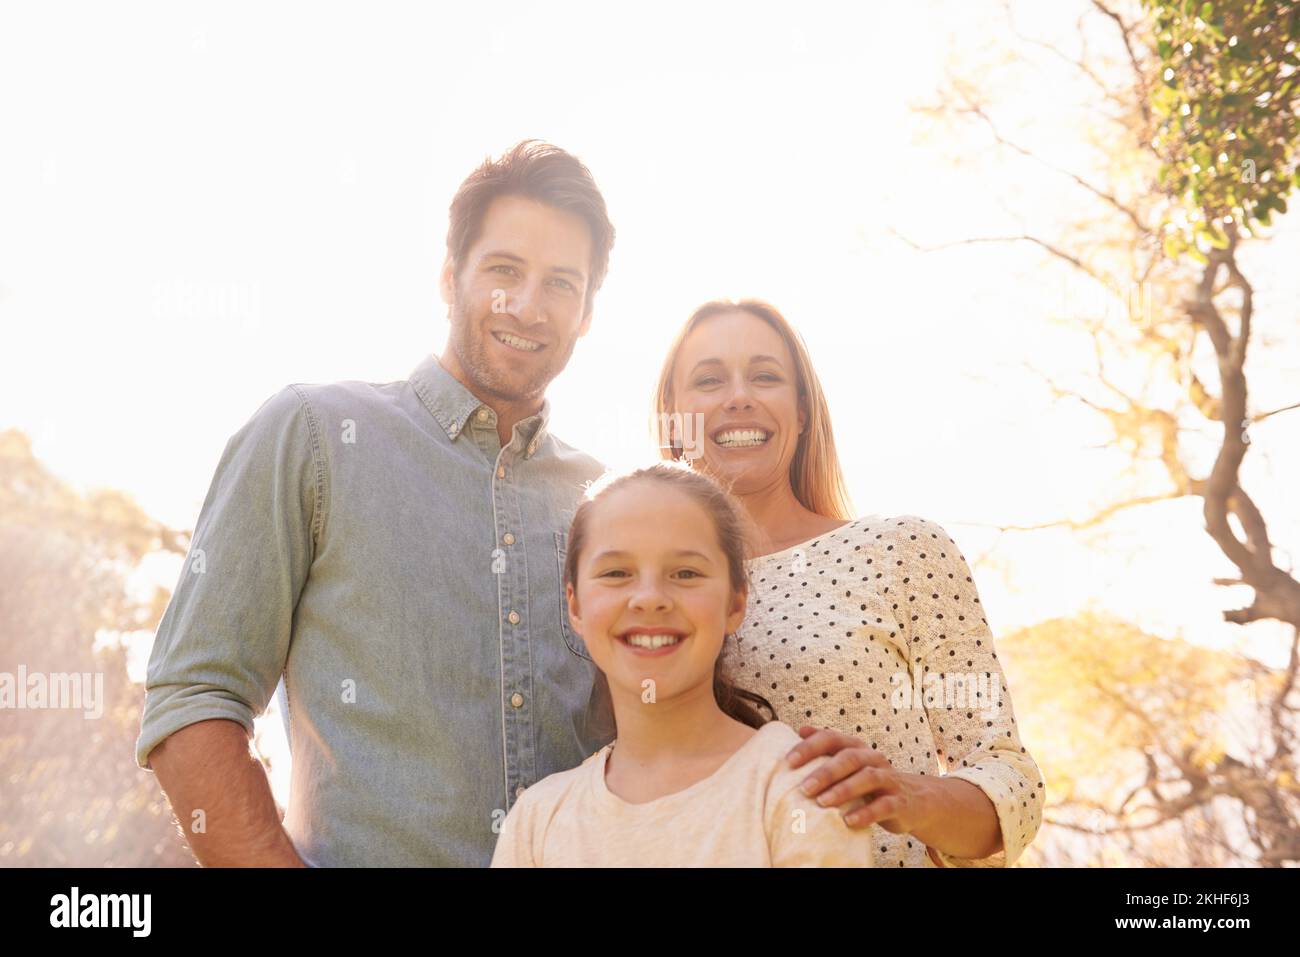 Happier together. A portrait of a happy family standing outdoors. Stock Photo